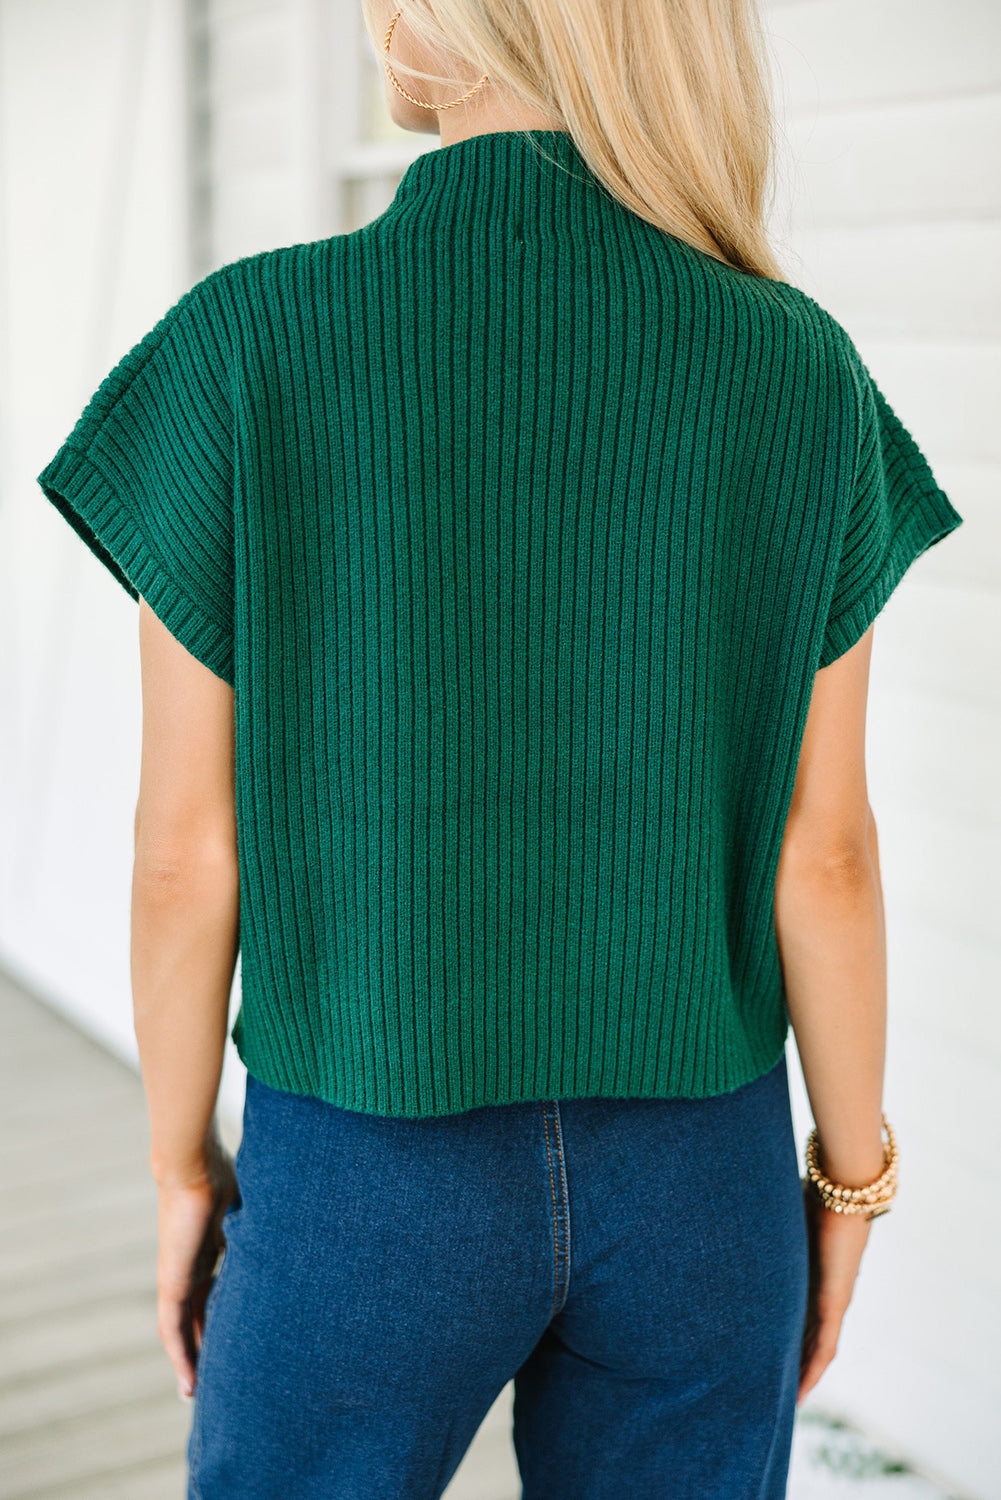 Blackish Green Patch Pocket Ribbed Knit Short Sleeve Sweater Pre Order Sweaters & Cardigans JT's Designer Fashion